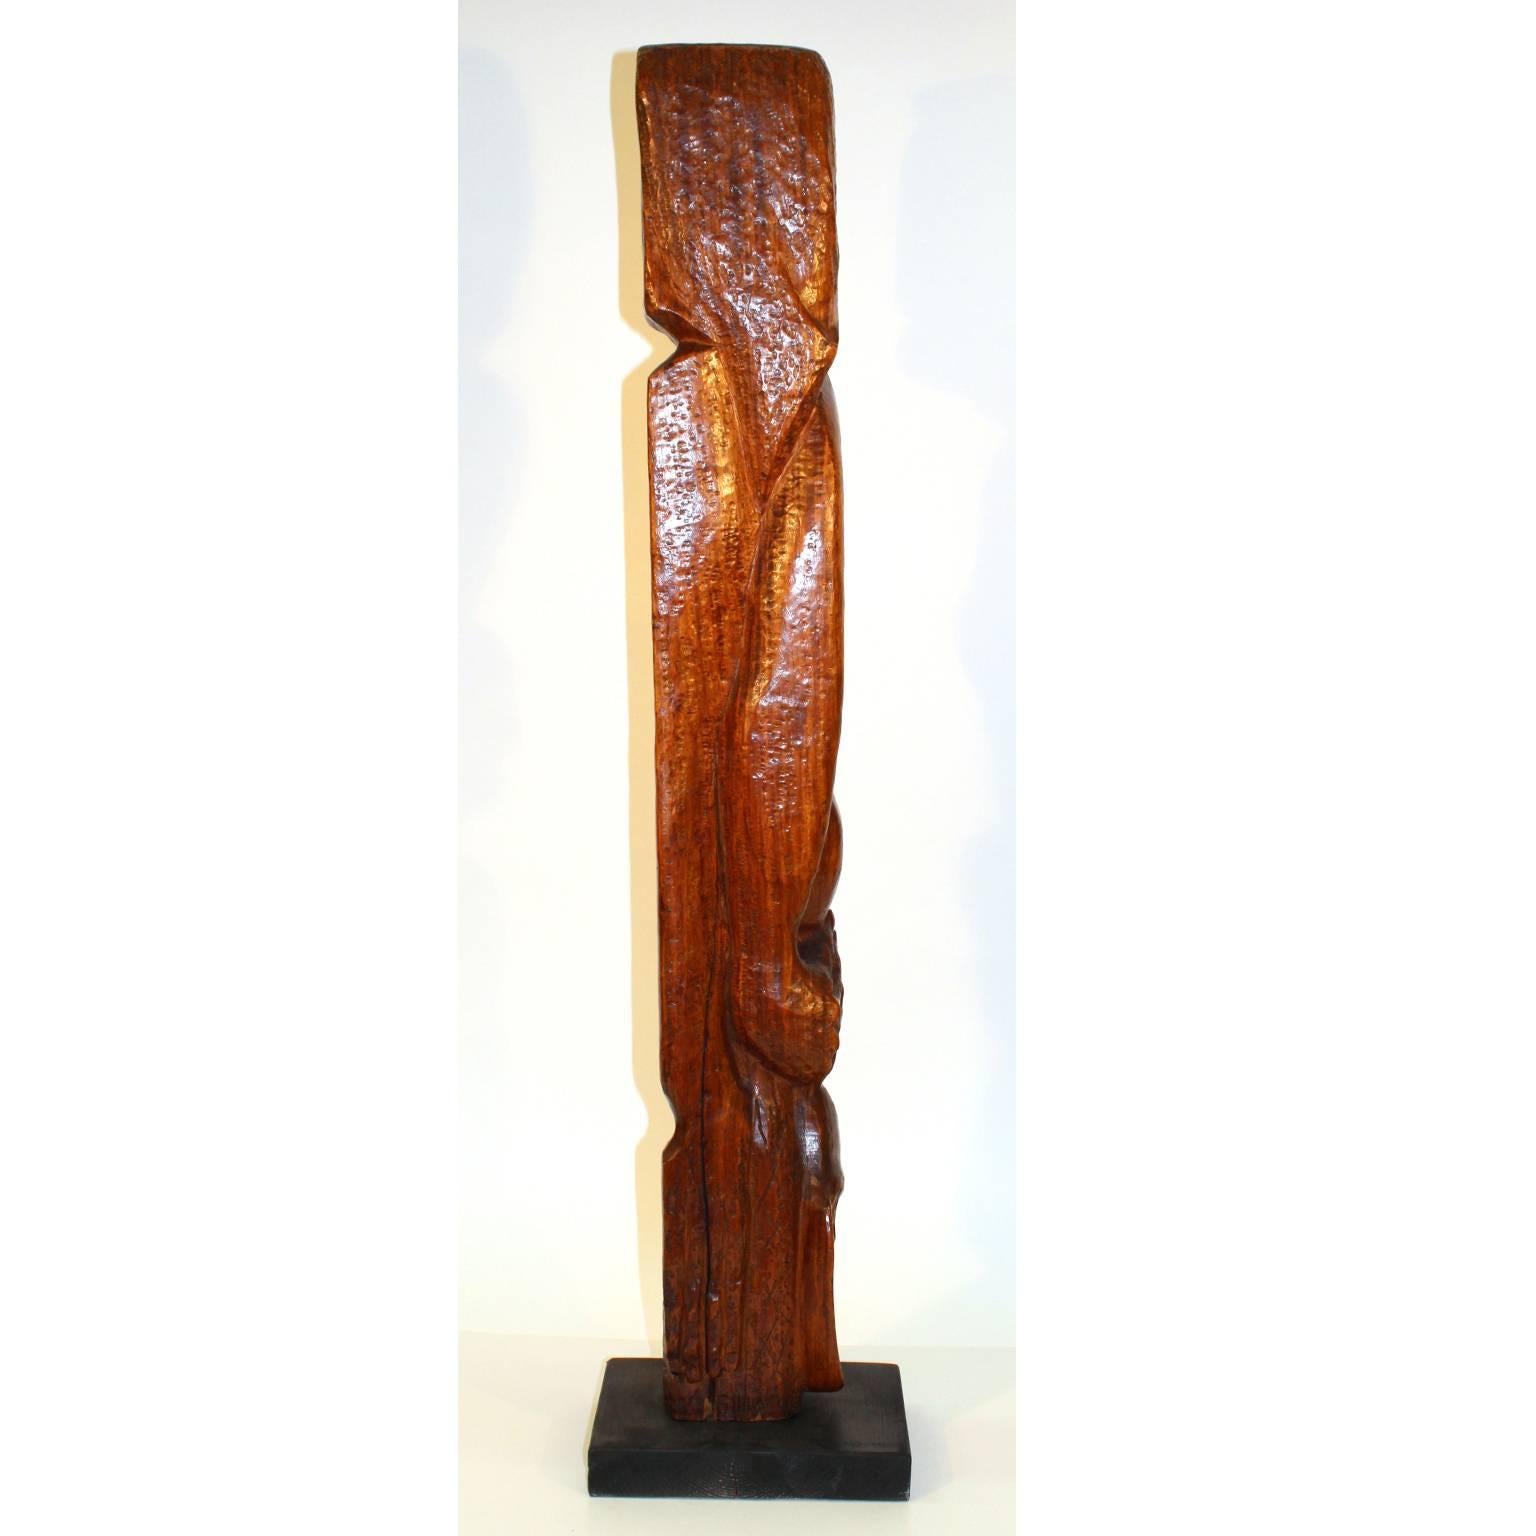 Clara Shainess 1940s Carved Wood Sculpture In Good Condition For Sale In New York, NY